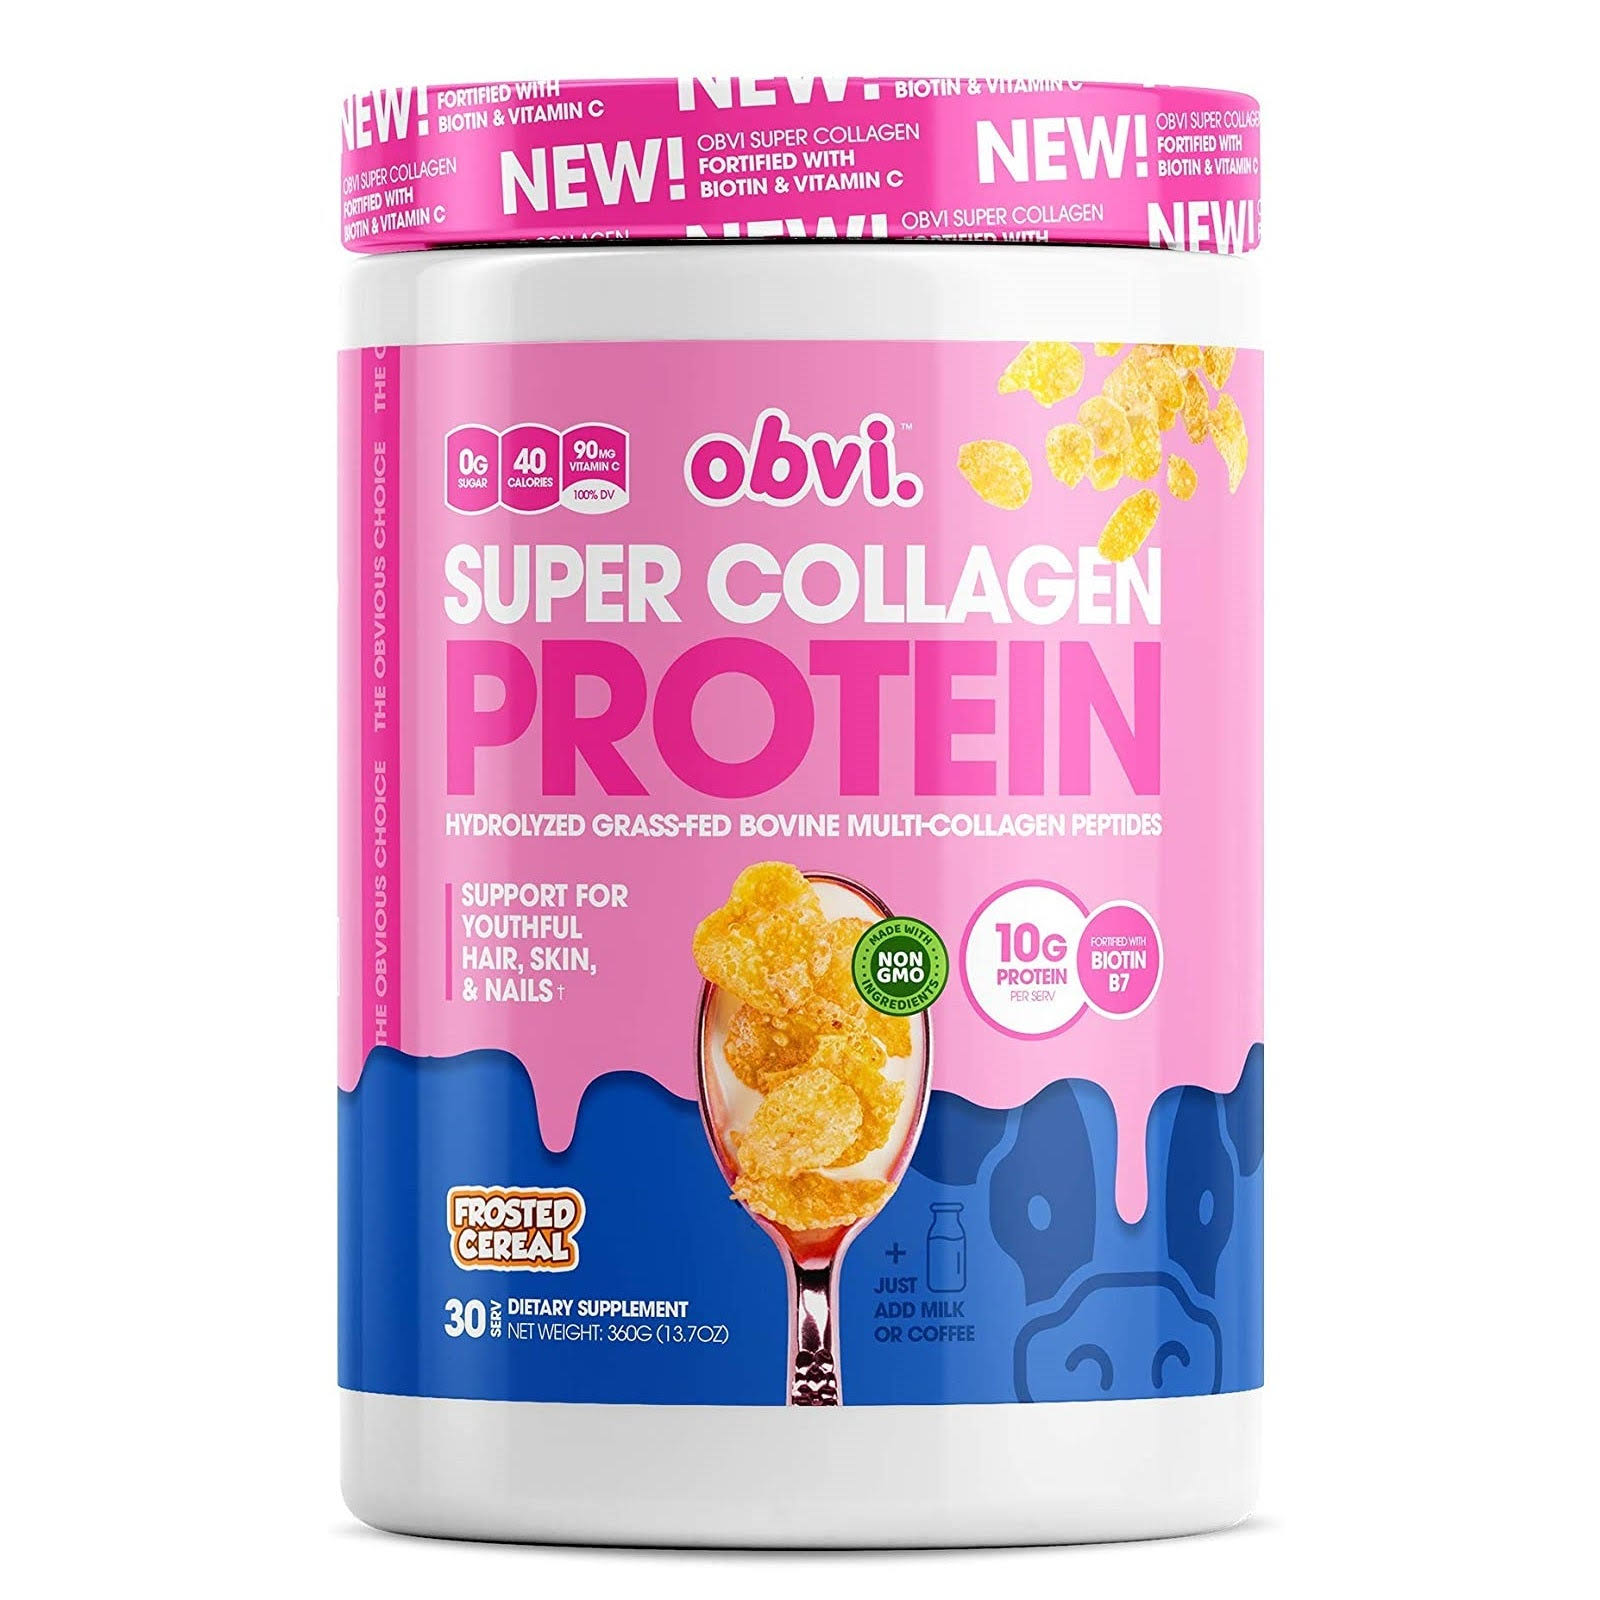 Obvi, Super Collagen Protein Frosted Cereal